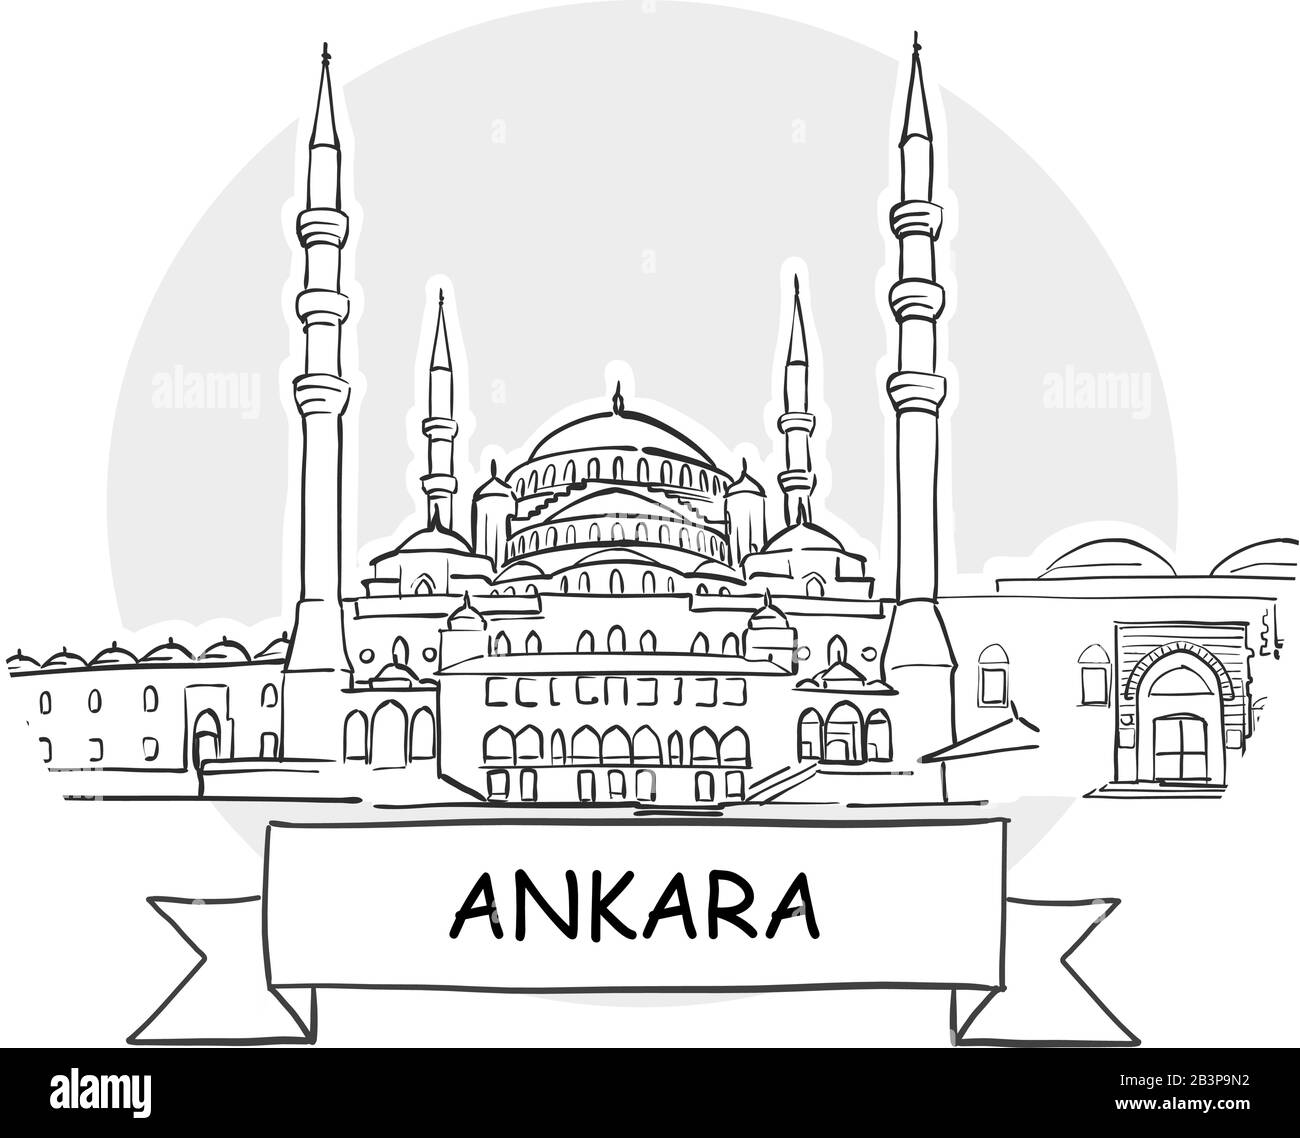 Ankara Cityscape Vector Sign. Line Art Illustration with Ribbon and Title. Stock Vector